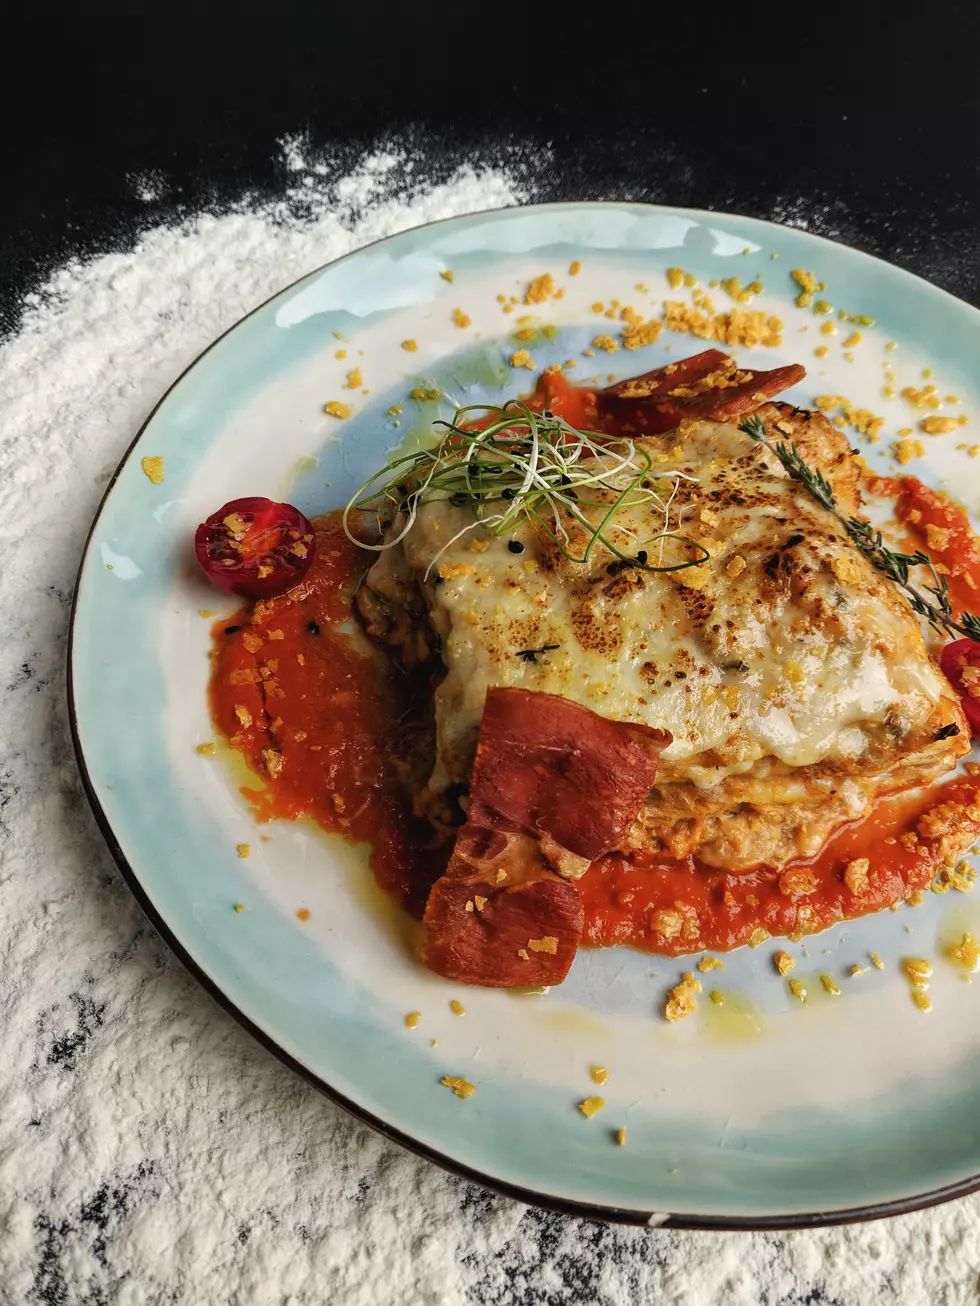 Saucy, Cheesy, Goodness &#8211; Here&#8217;s Where You Can Eat New Jersey&#8217;s Best Lasagna